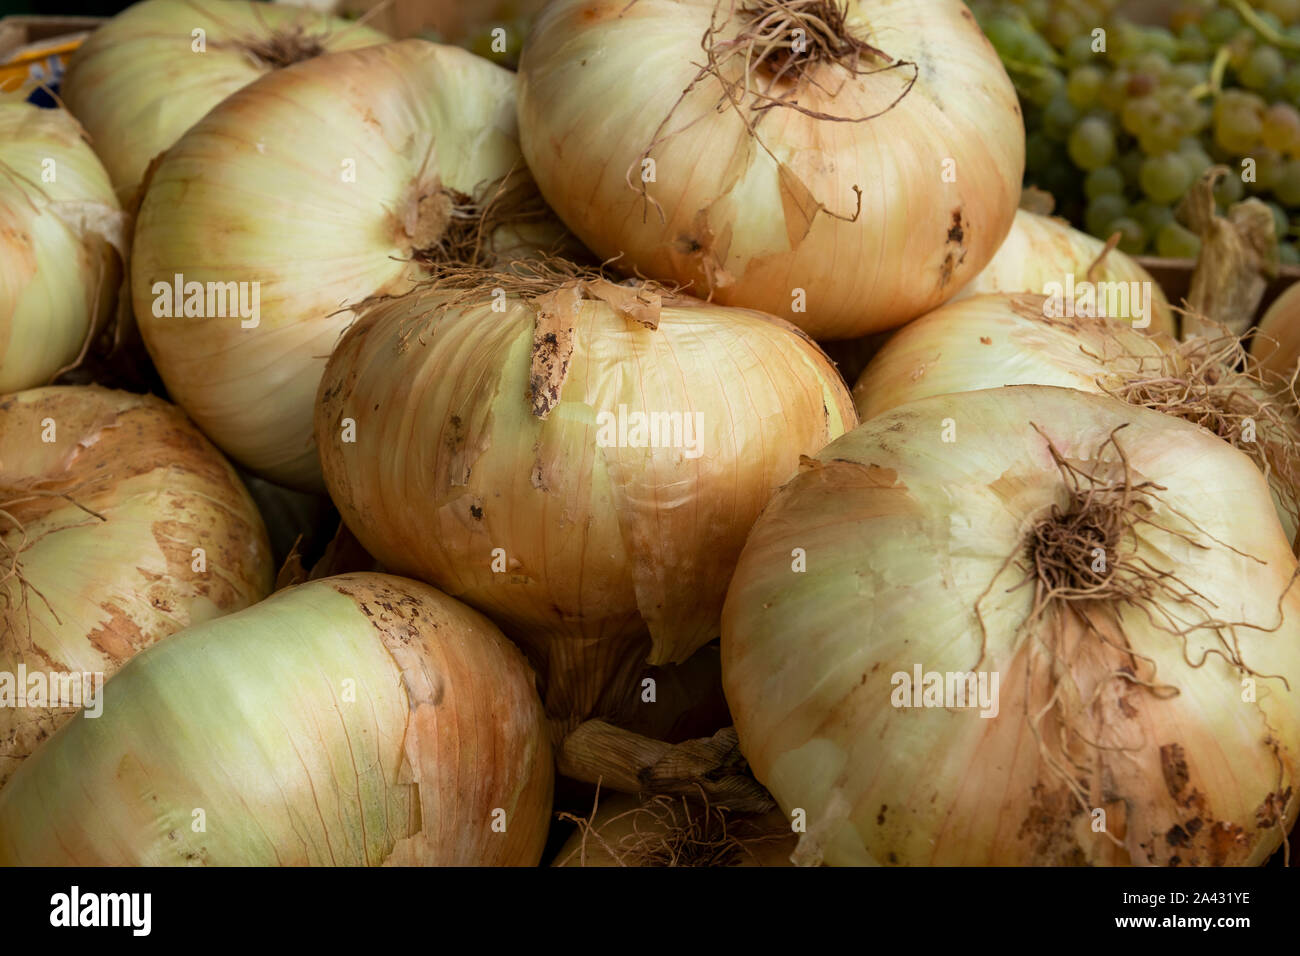 White onions in wooden crate at farmers market Stock Photo